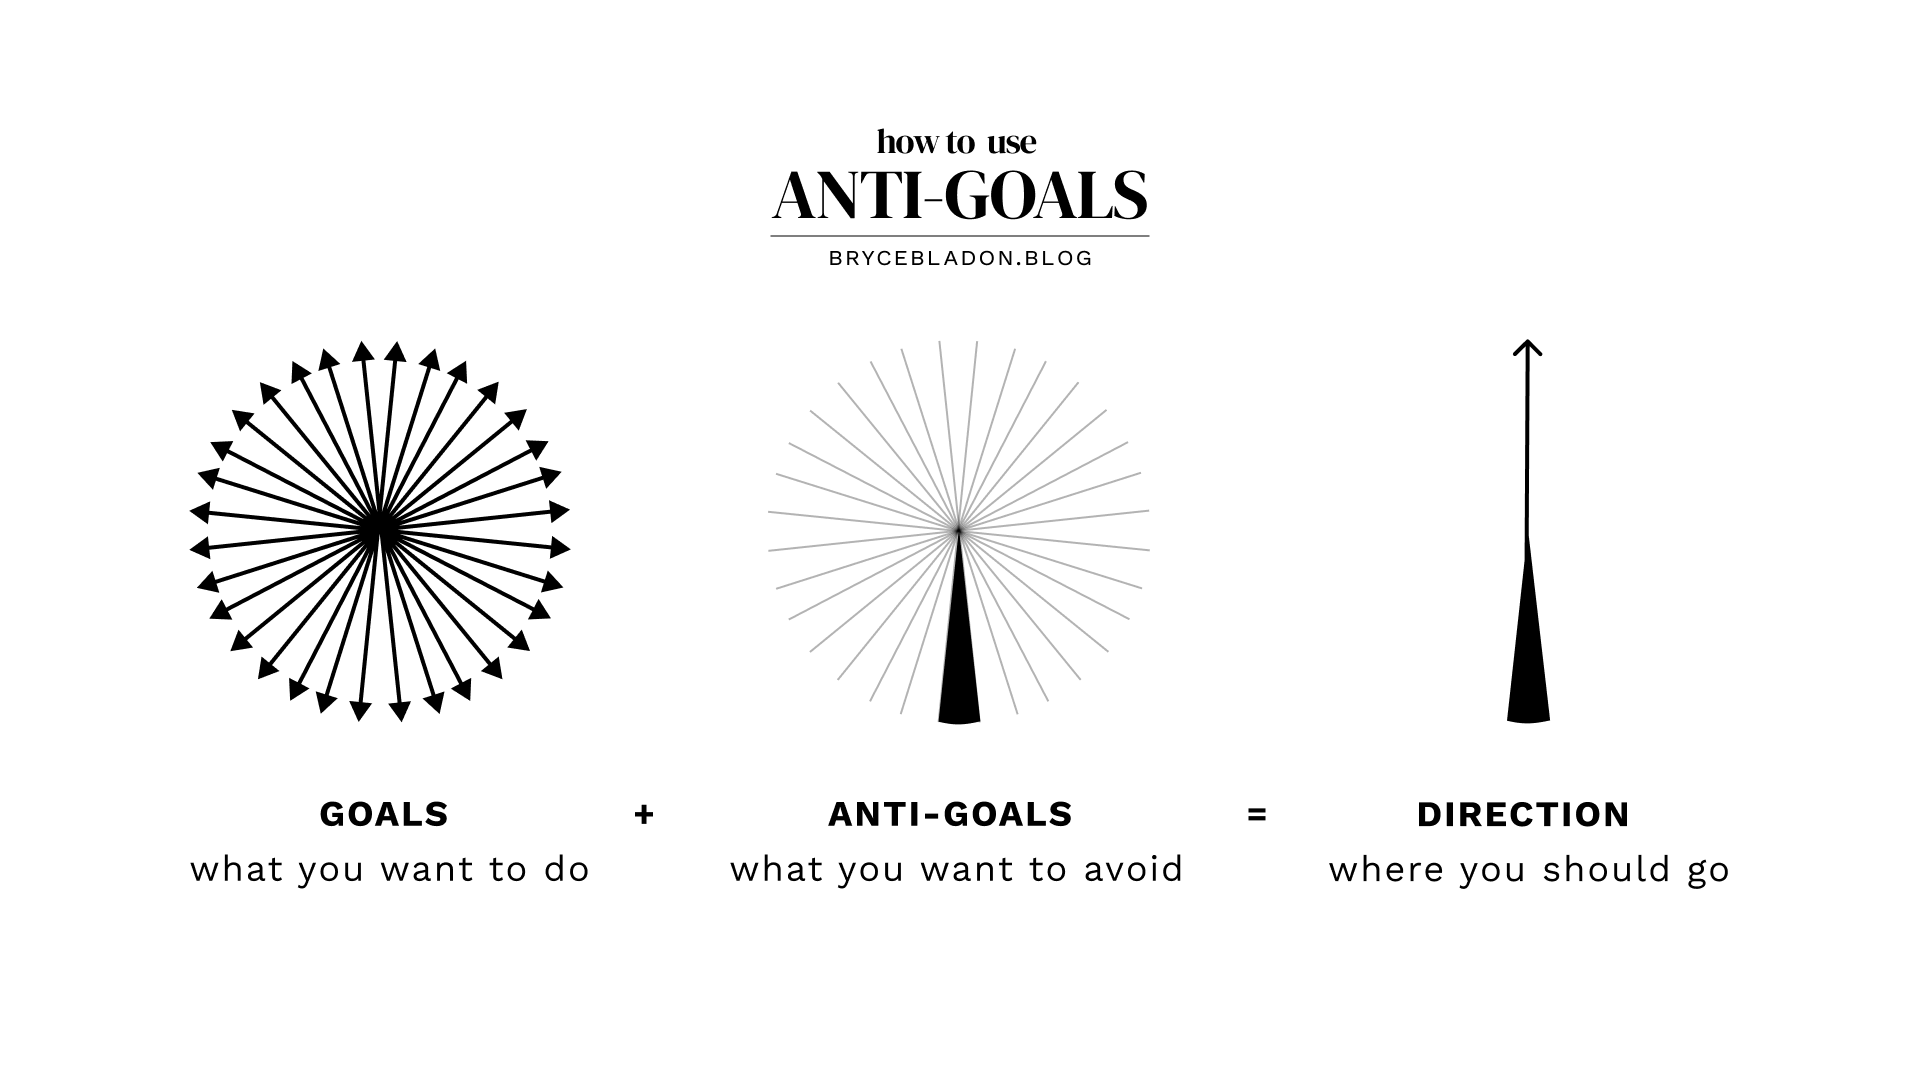 How to use anti-goals